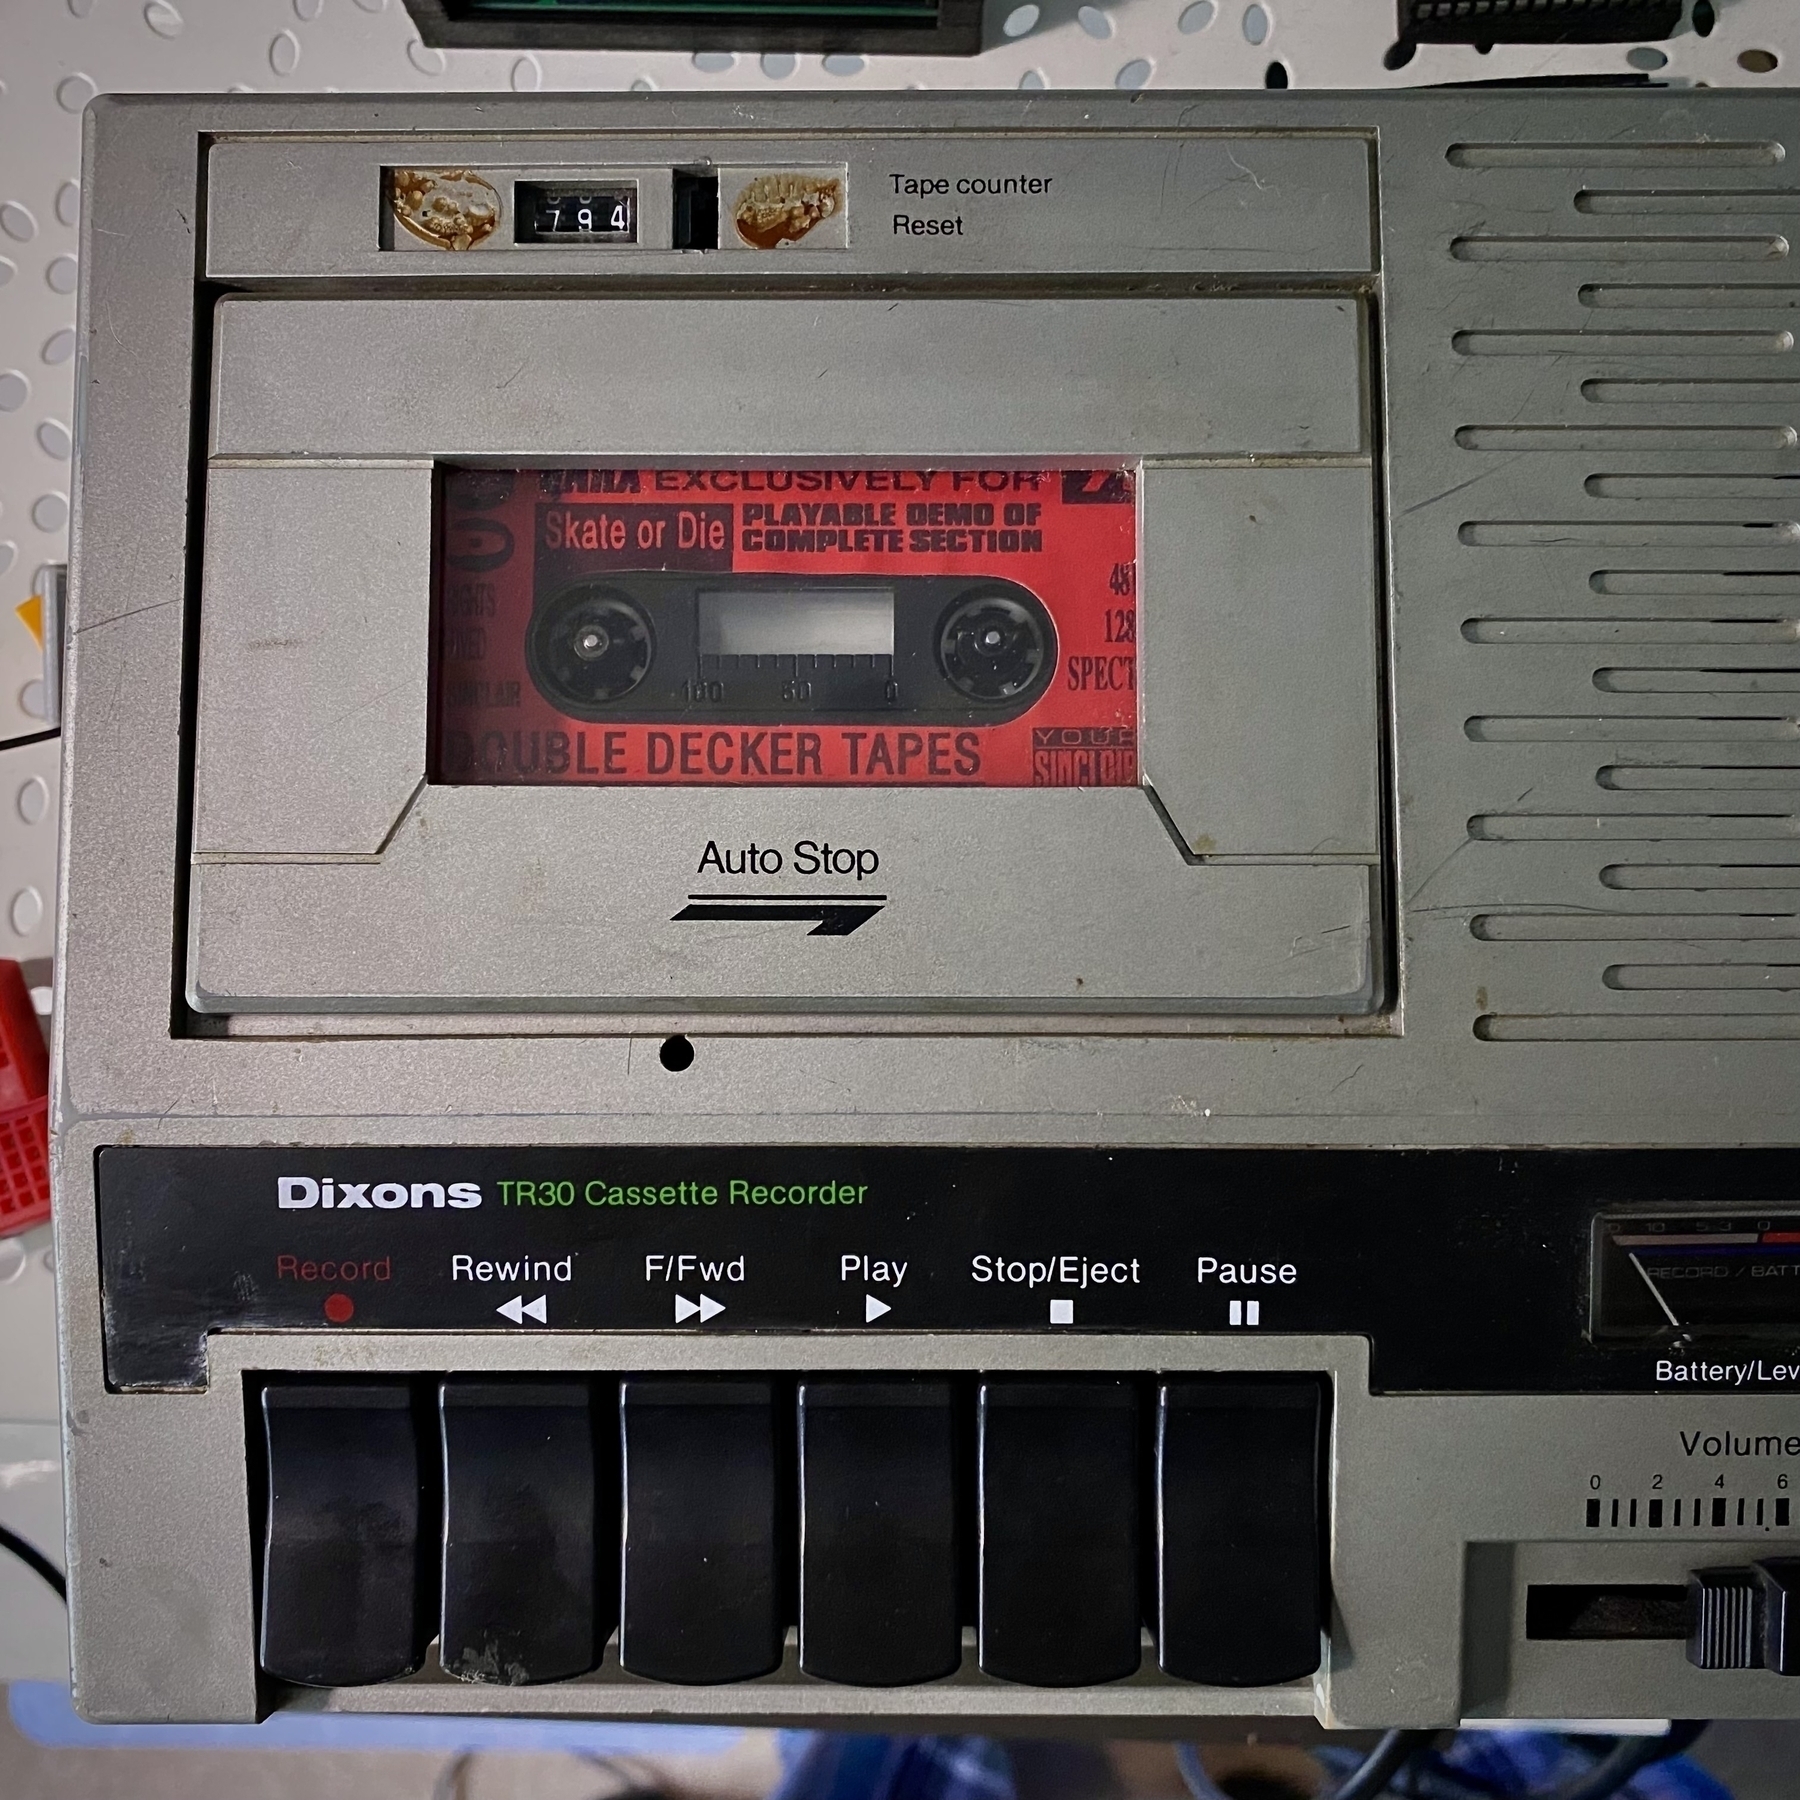 Overhead photo of the cassette recorder showing lots of patina from decades of wear and tear. It’s dusty, scratched and worn with a small faceplate around the tape counter missing. A red cassette tape can be seen through the deck window. The label reads: SKATE OR DIE; DOUBLE DECKER TAPES.